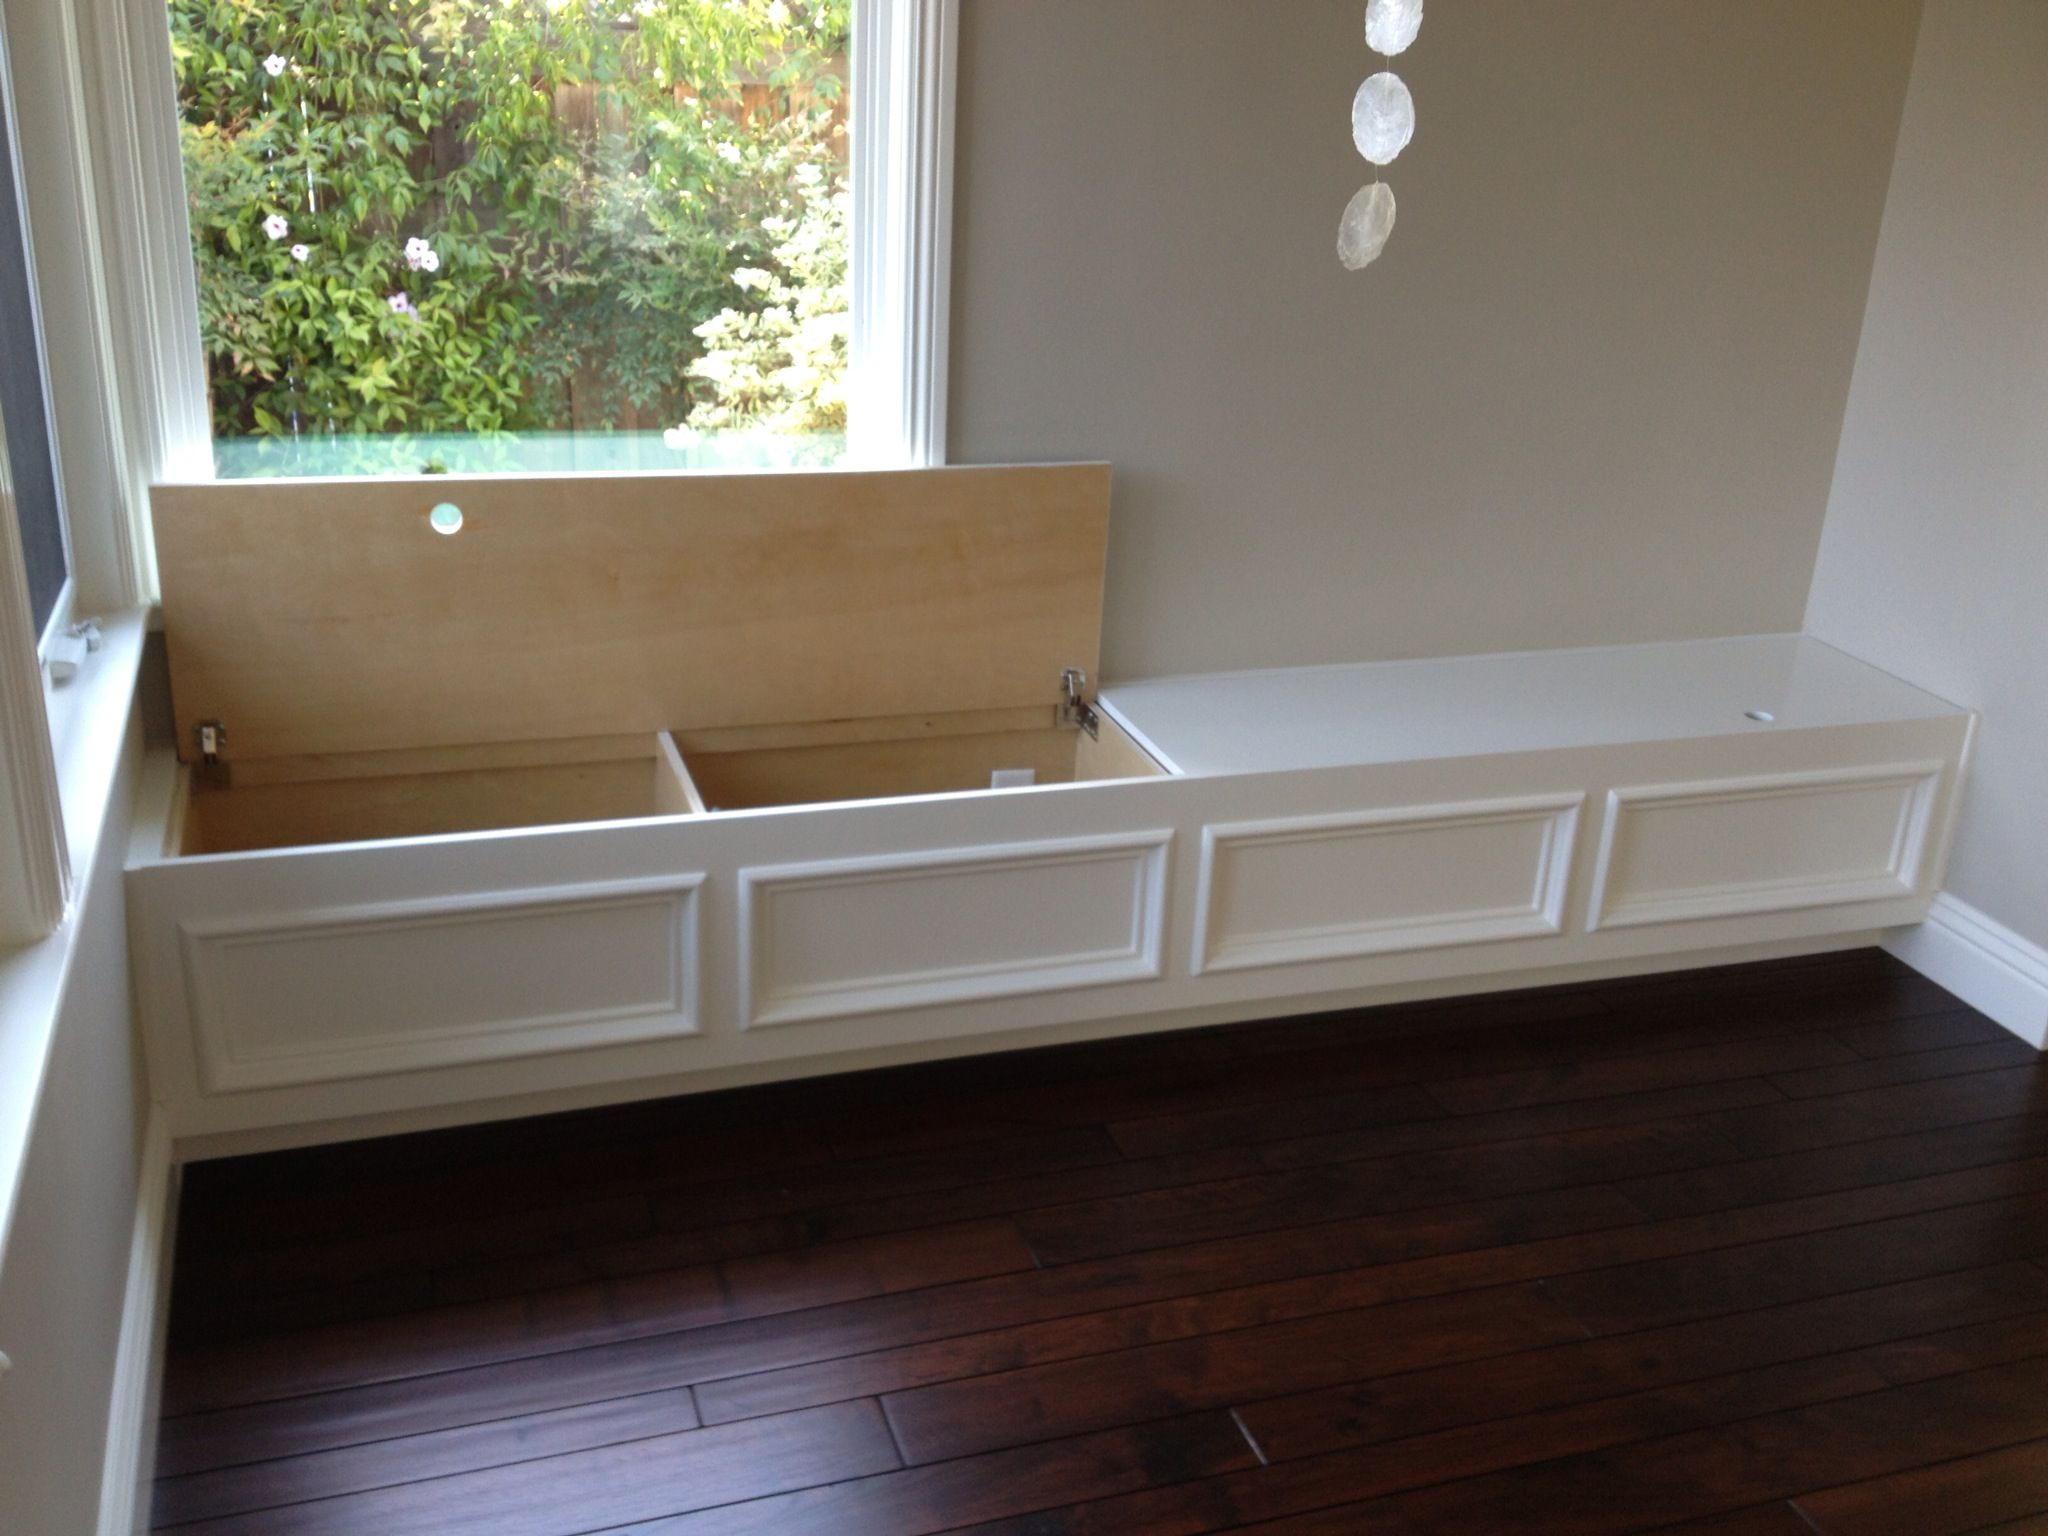 Building Storage Bench Seat
 Built in bench seat with storage Put along wall in family